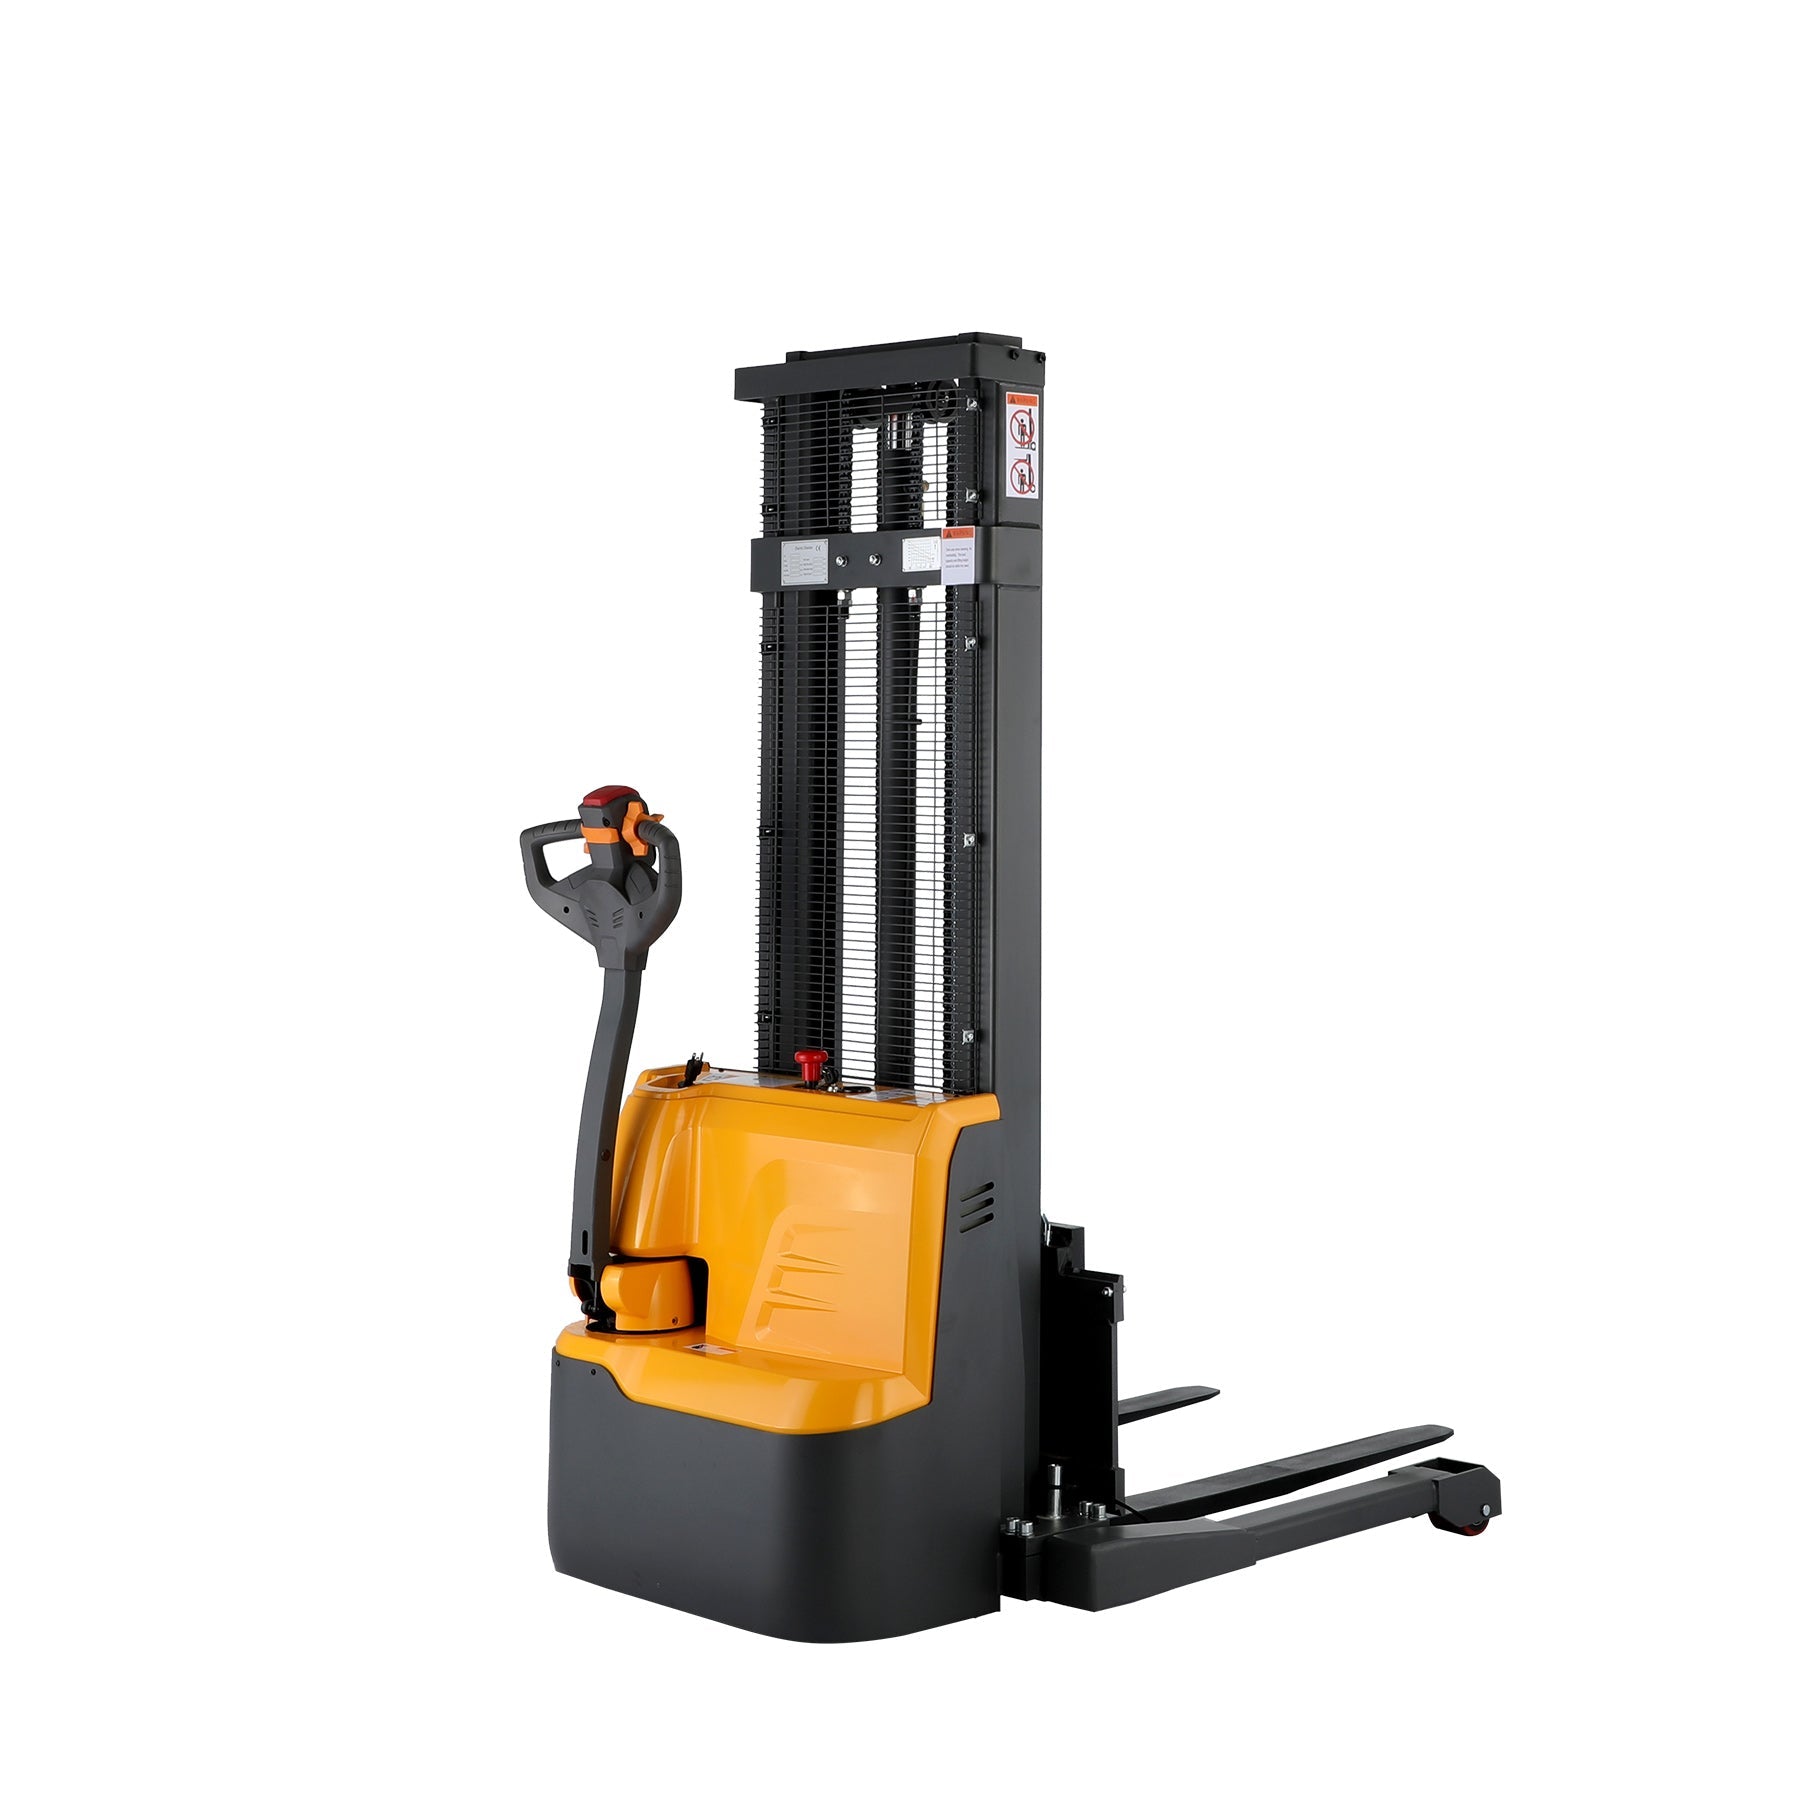 ApolloLift | Powered Forklift Full Electric Walkie Stacker 2640lbs Cap. Straddle Legs. 130" lifting A-3039